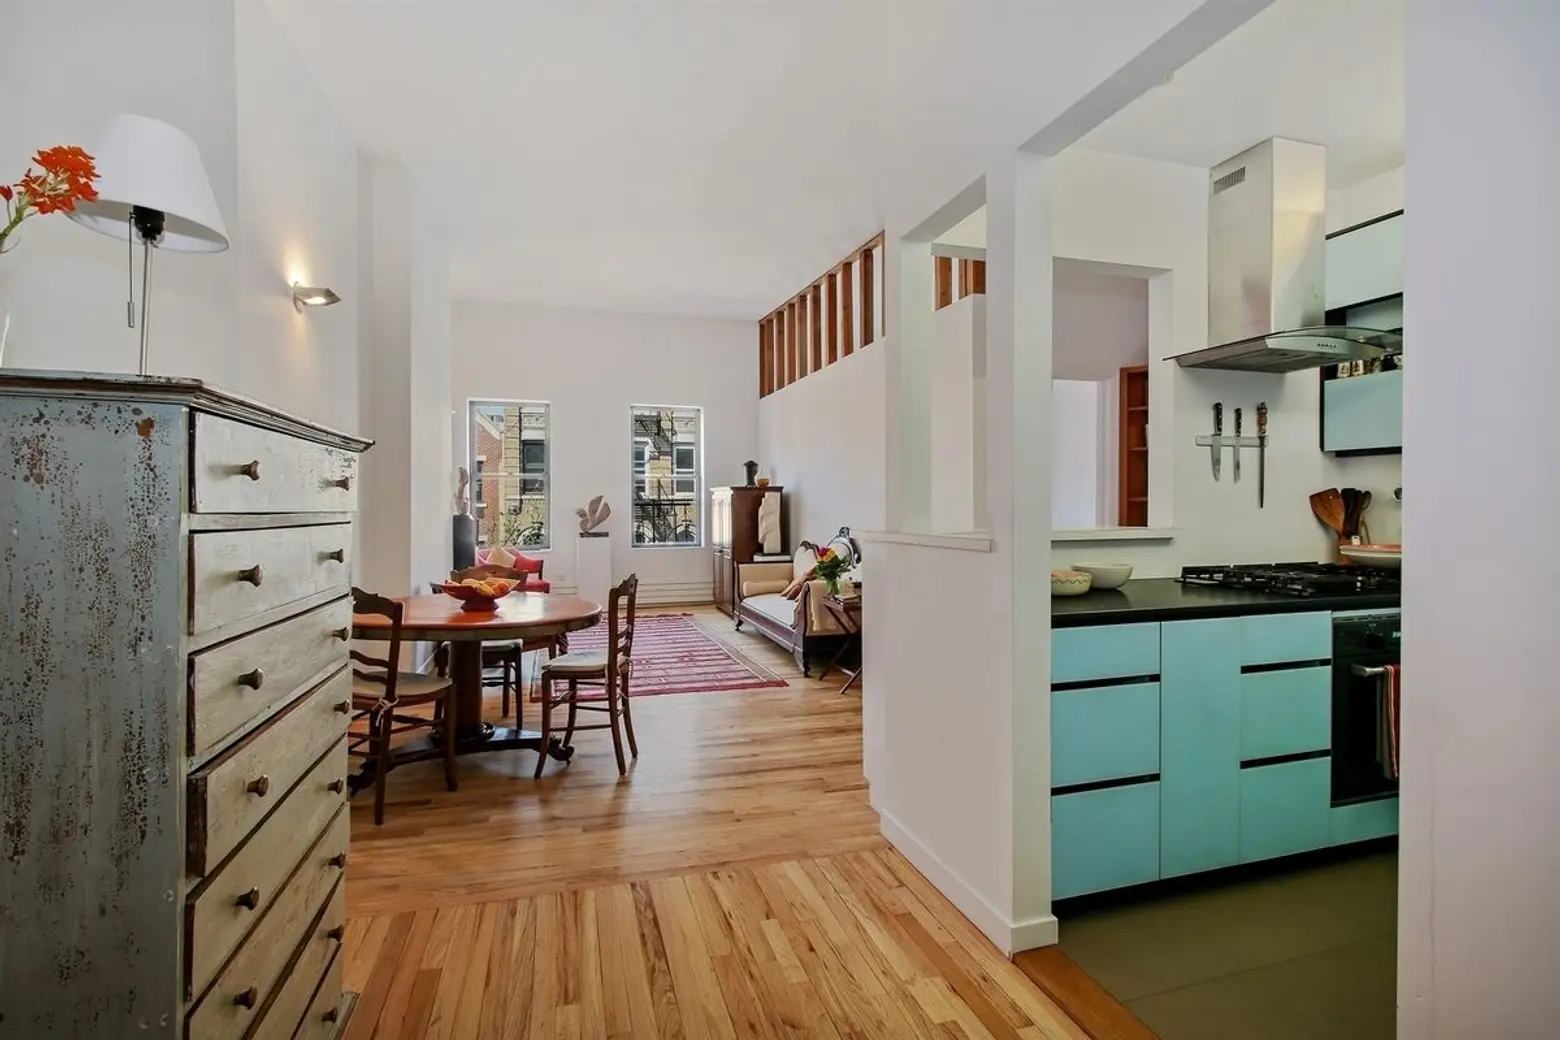 $1.2M East Village condo has a cool blue kitchen and a roof deck with a view